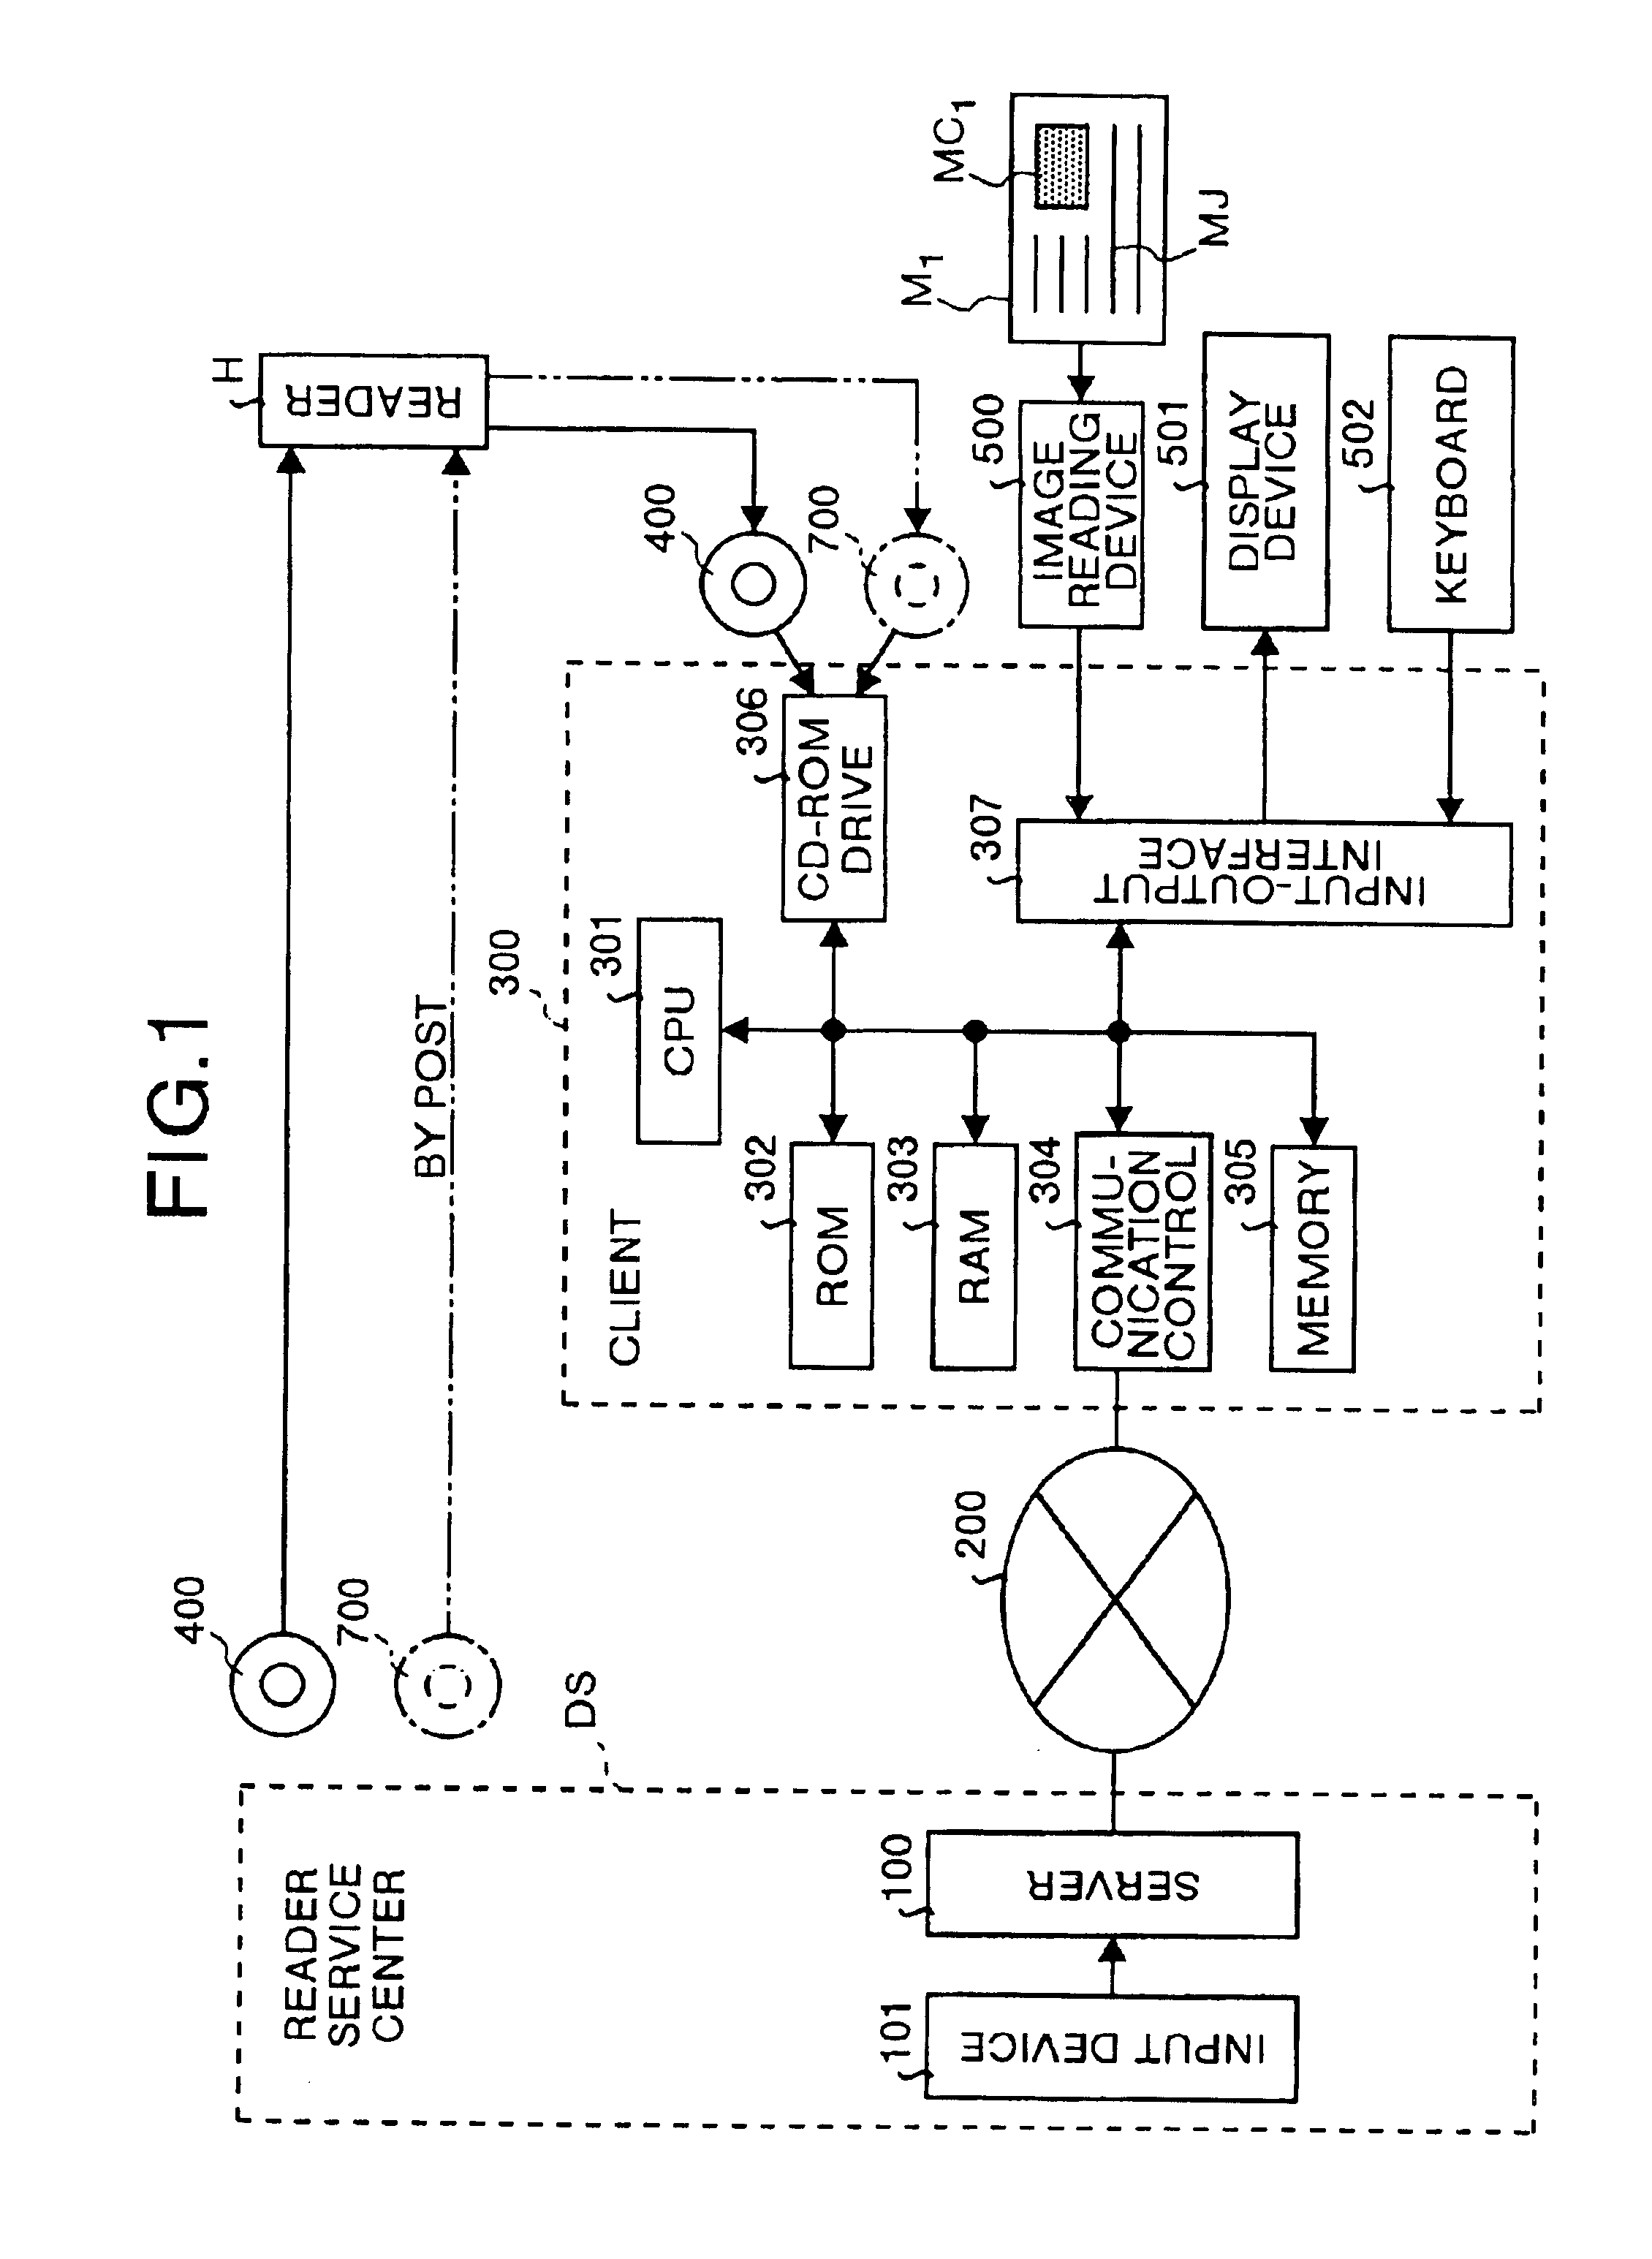 Information providing system, apparatus for producing a medium for providing the information, apparatus for restoring the provided information, computer product, a medium for providing the information